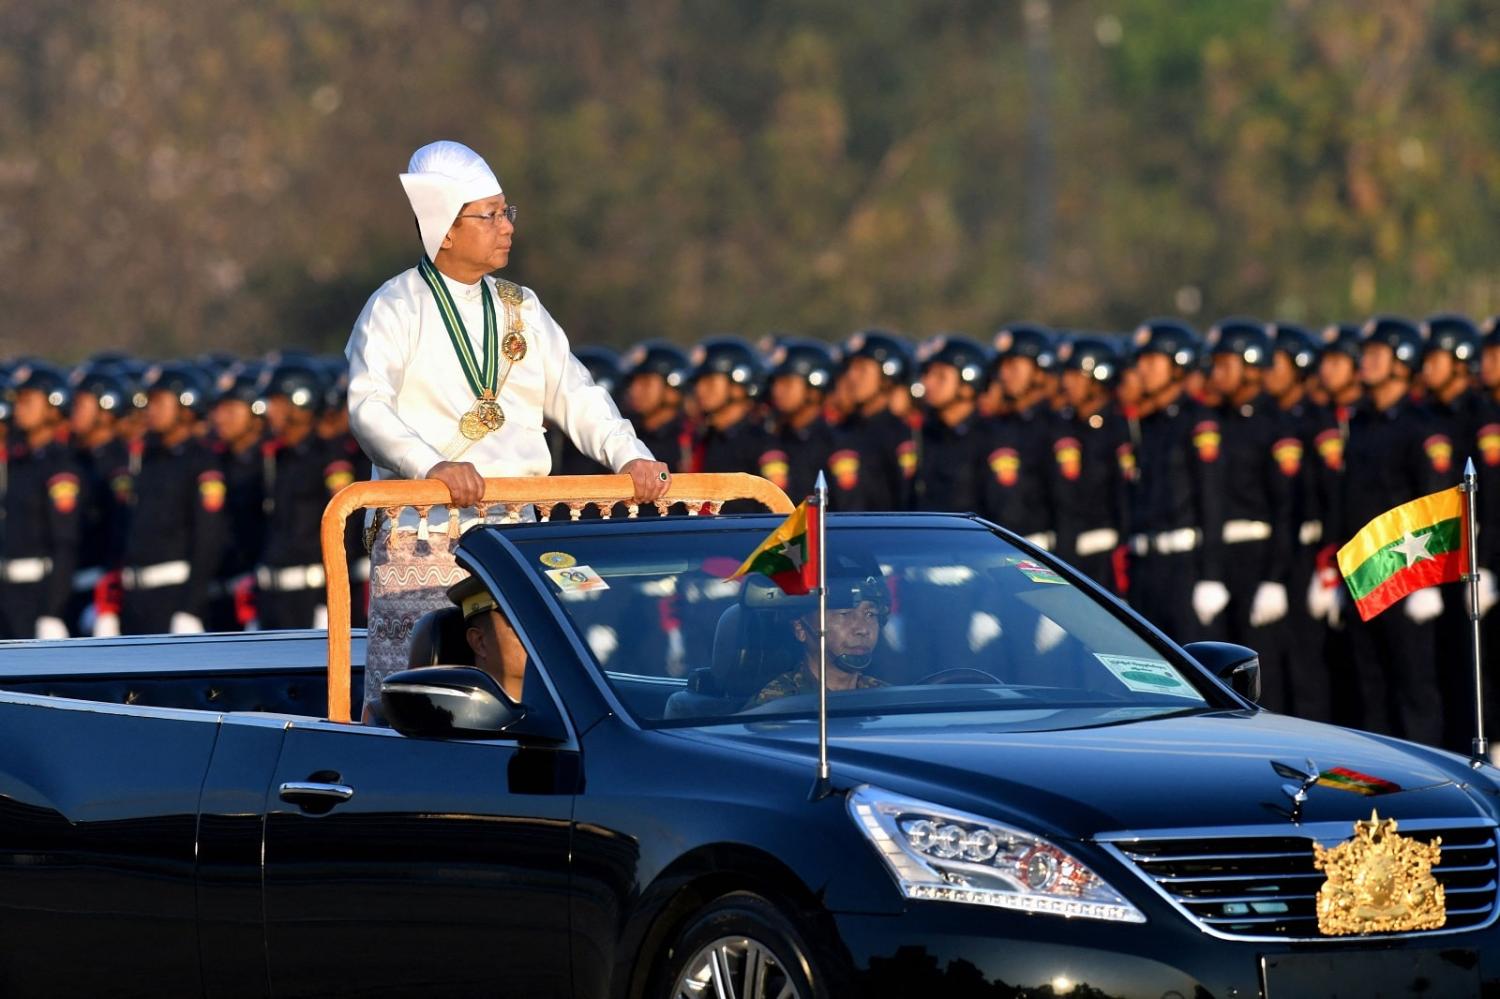 Myanmar’s military chief Min Aung Hlaing oversees a military display to mark the country’s Independence Day in Naypyidaw on 4 January 2023 (STR/AFP via Getty Images)